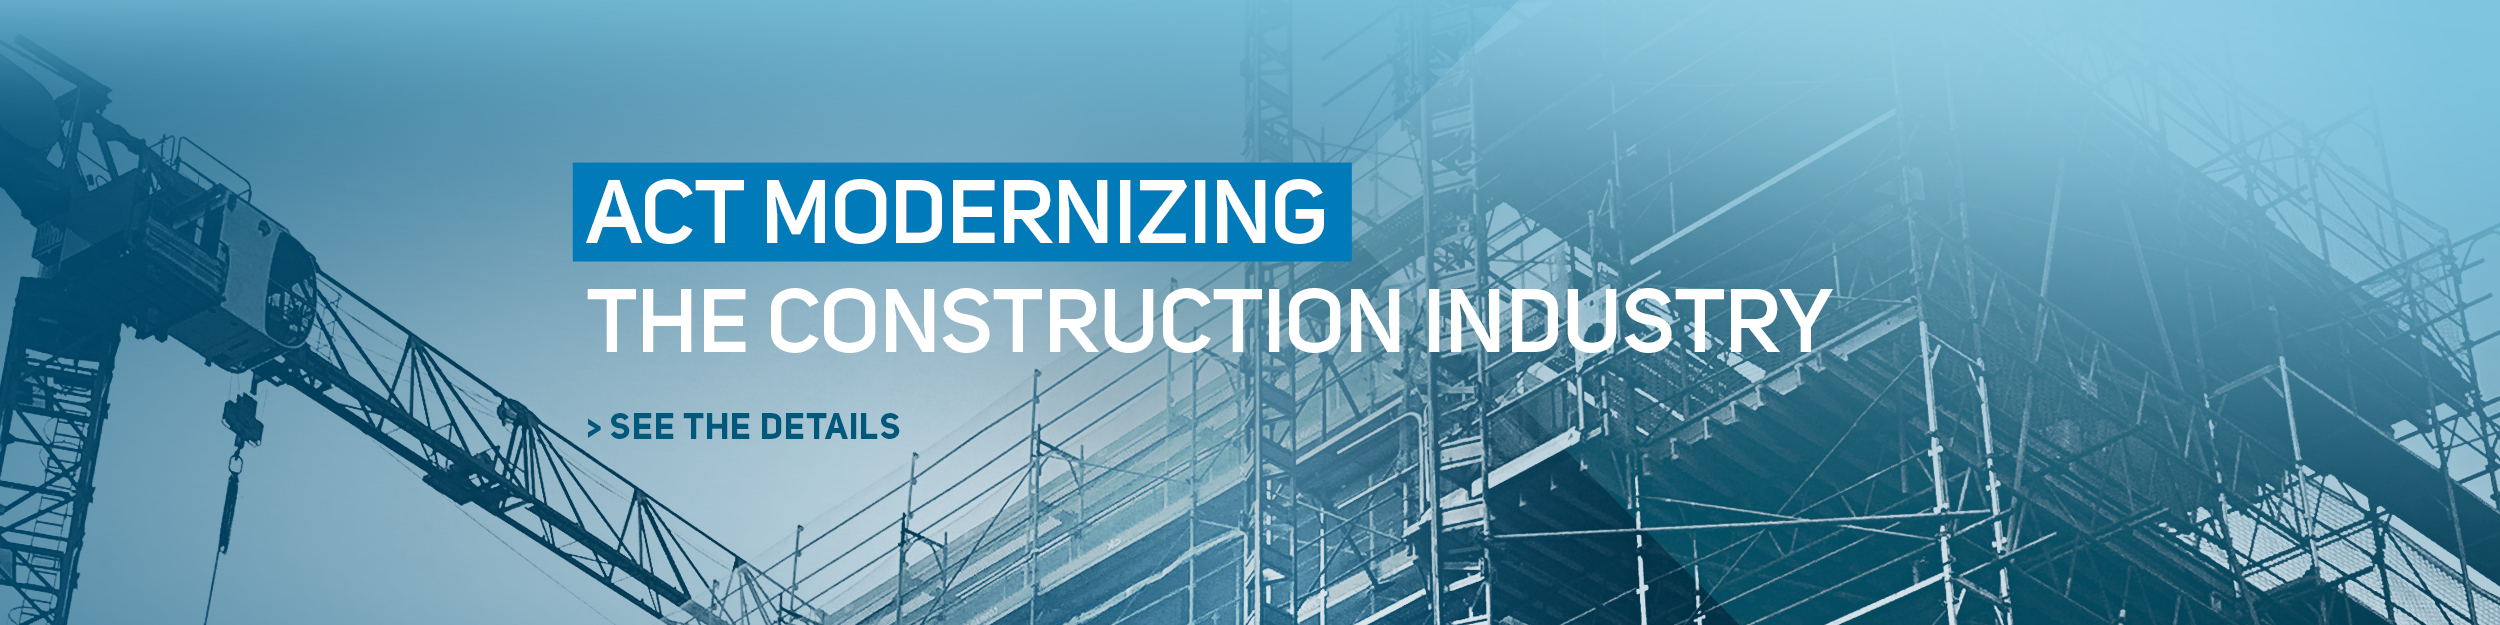 Act modernizing the construction industry